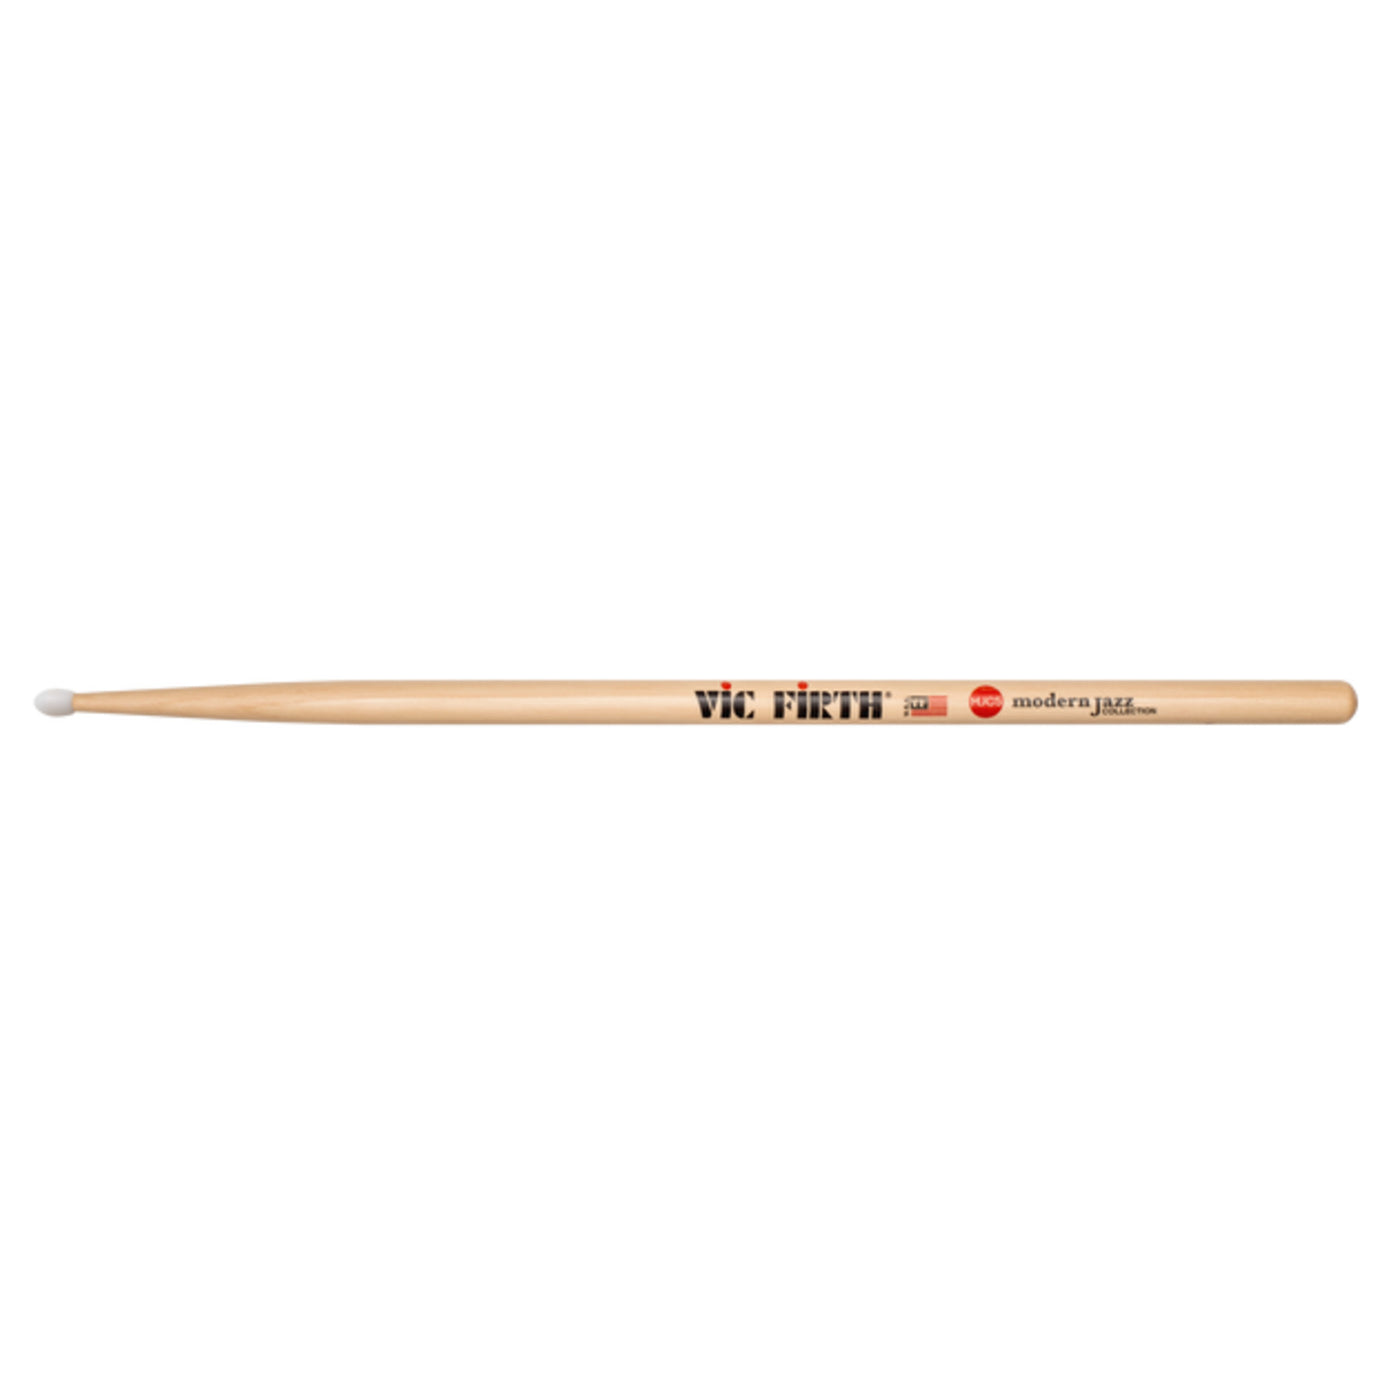 Vic Firth Modern Jazz Collection - 5 Drumstick (MJC5)